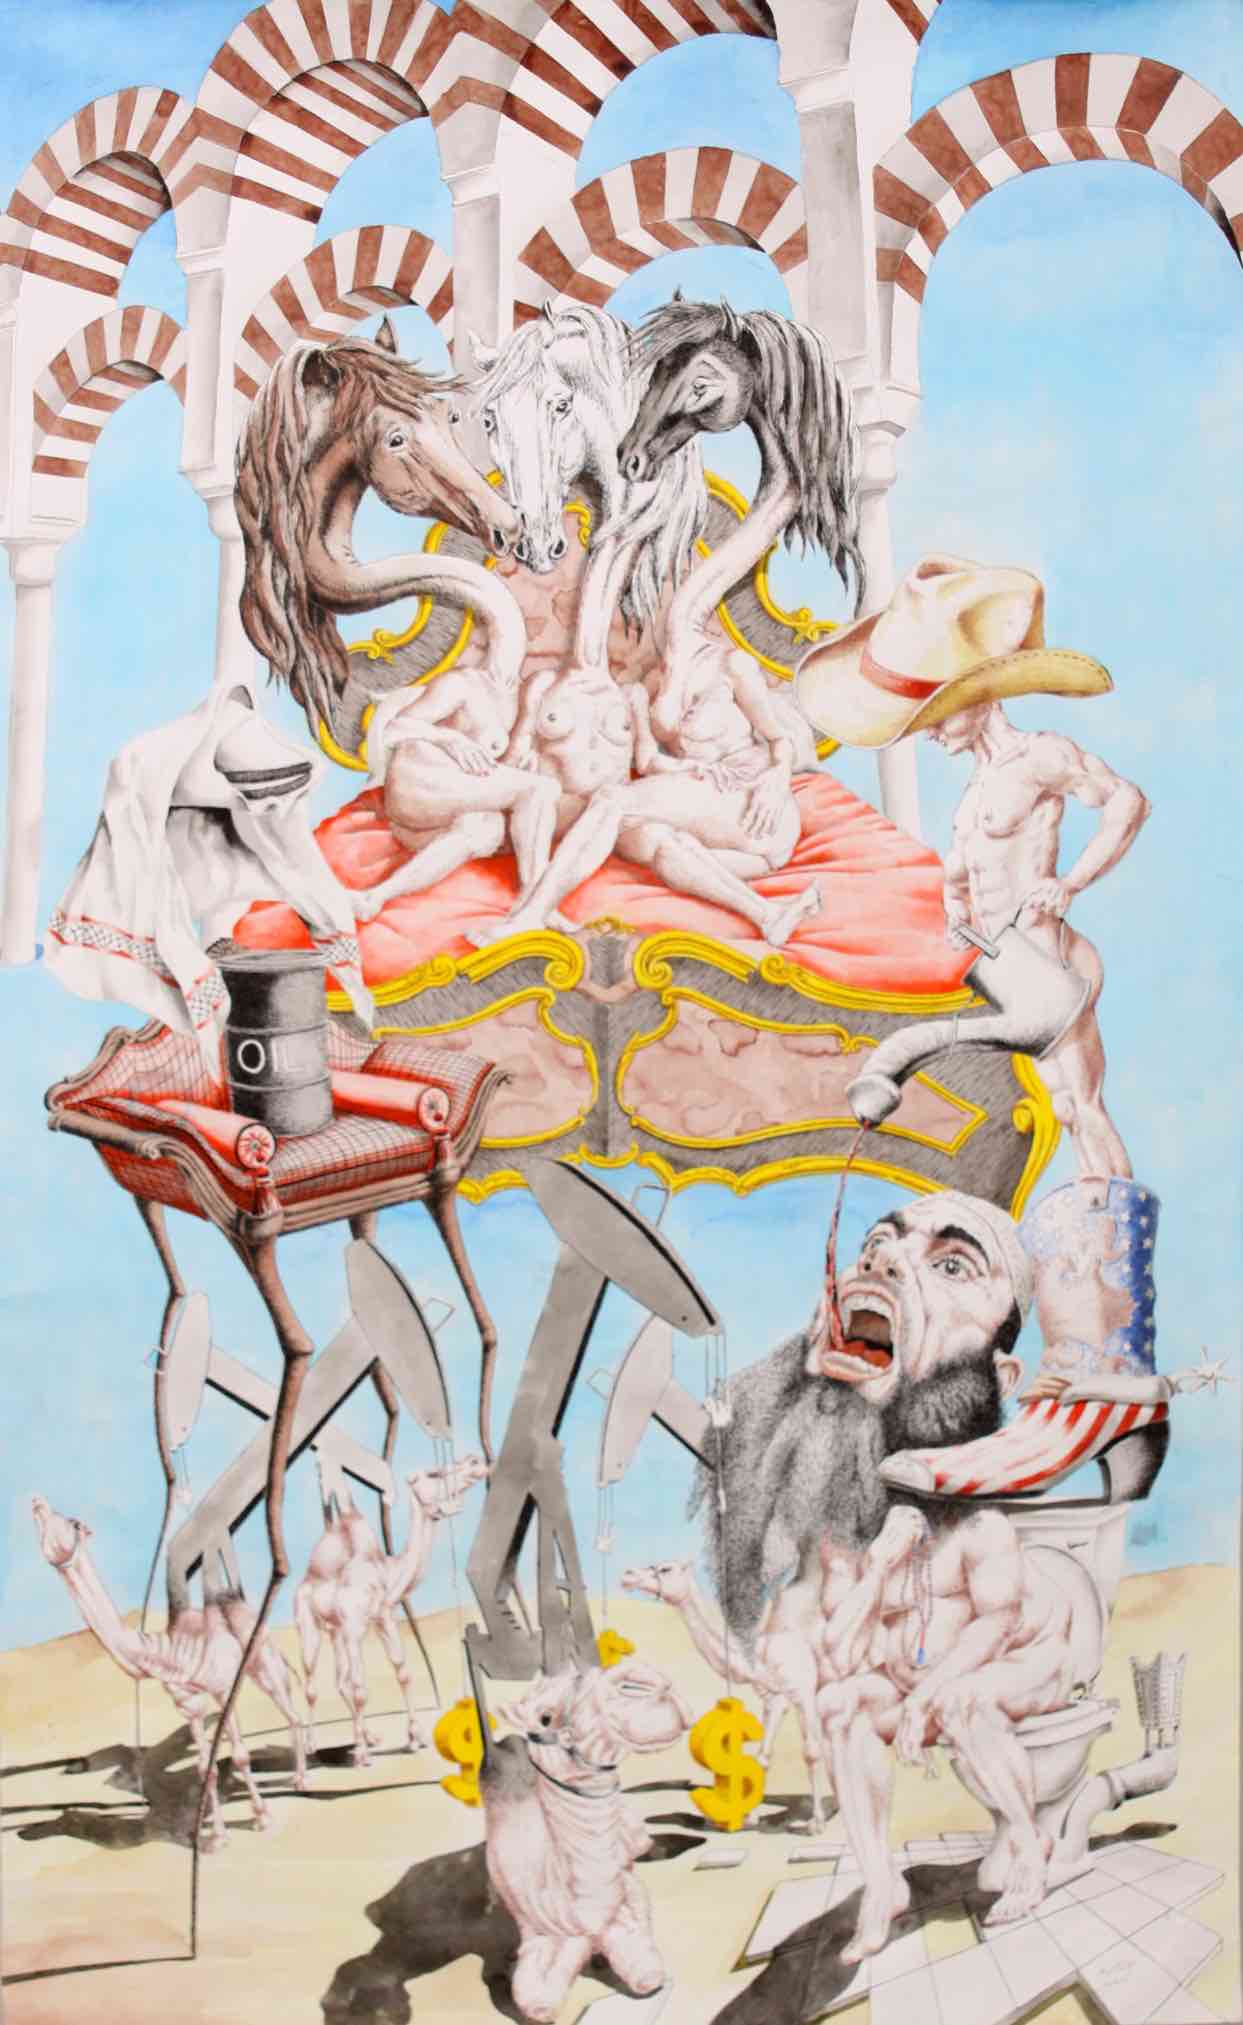 Slaves, 2013, mixed media on paper, 130 x 80 cm